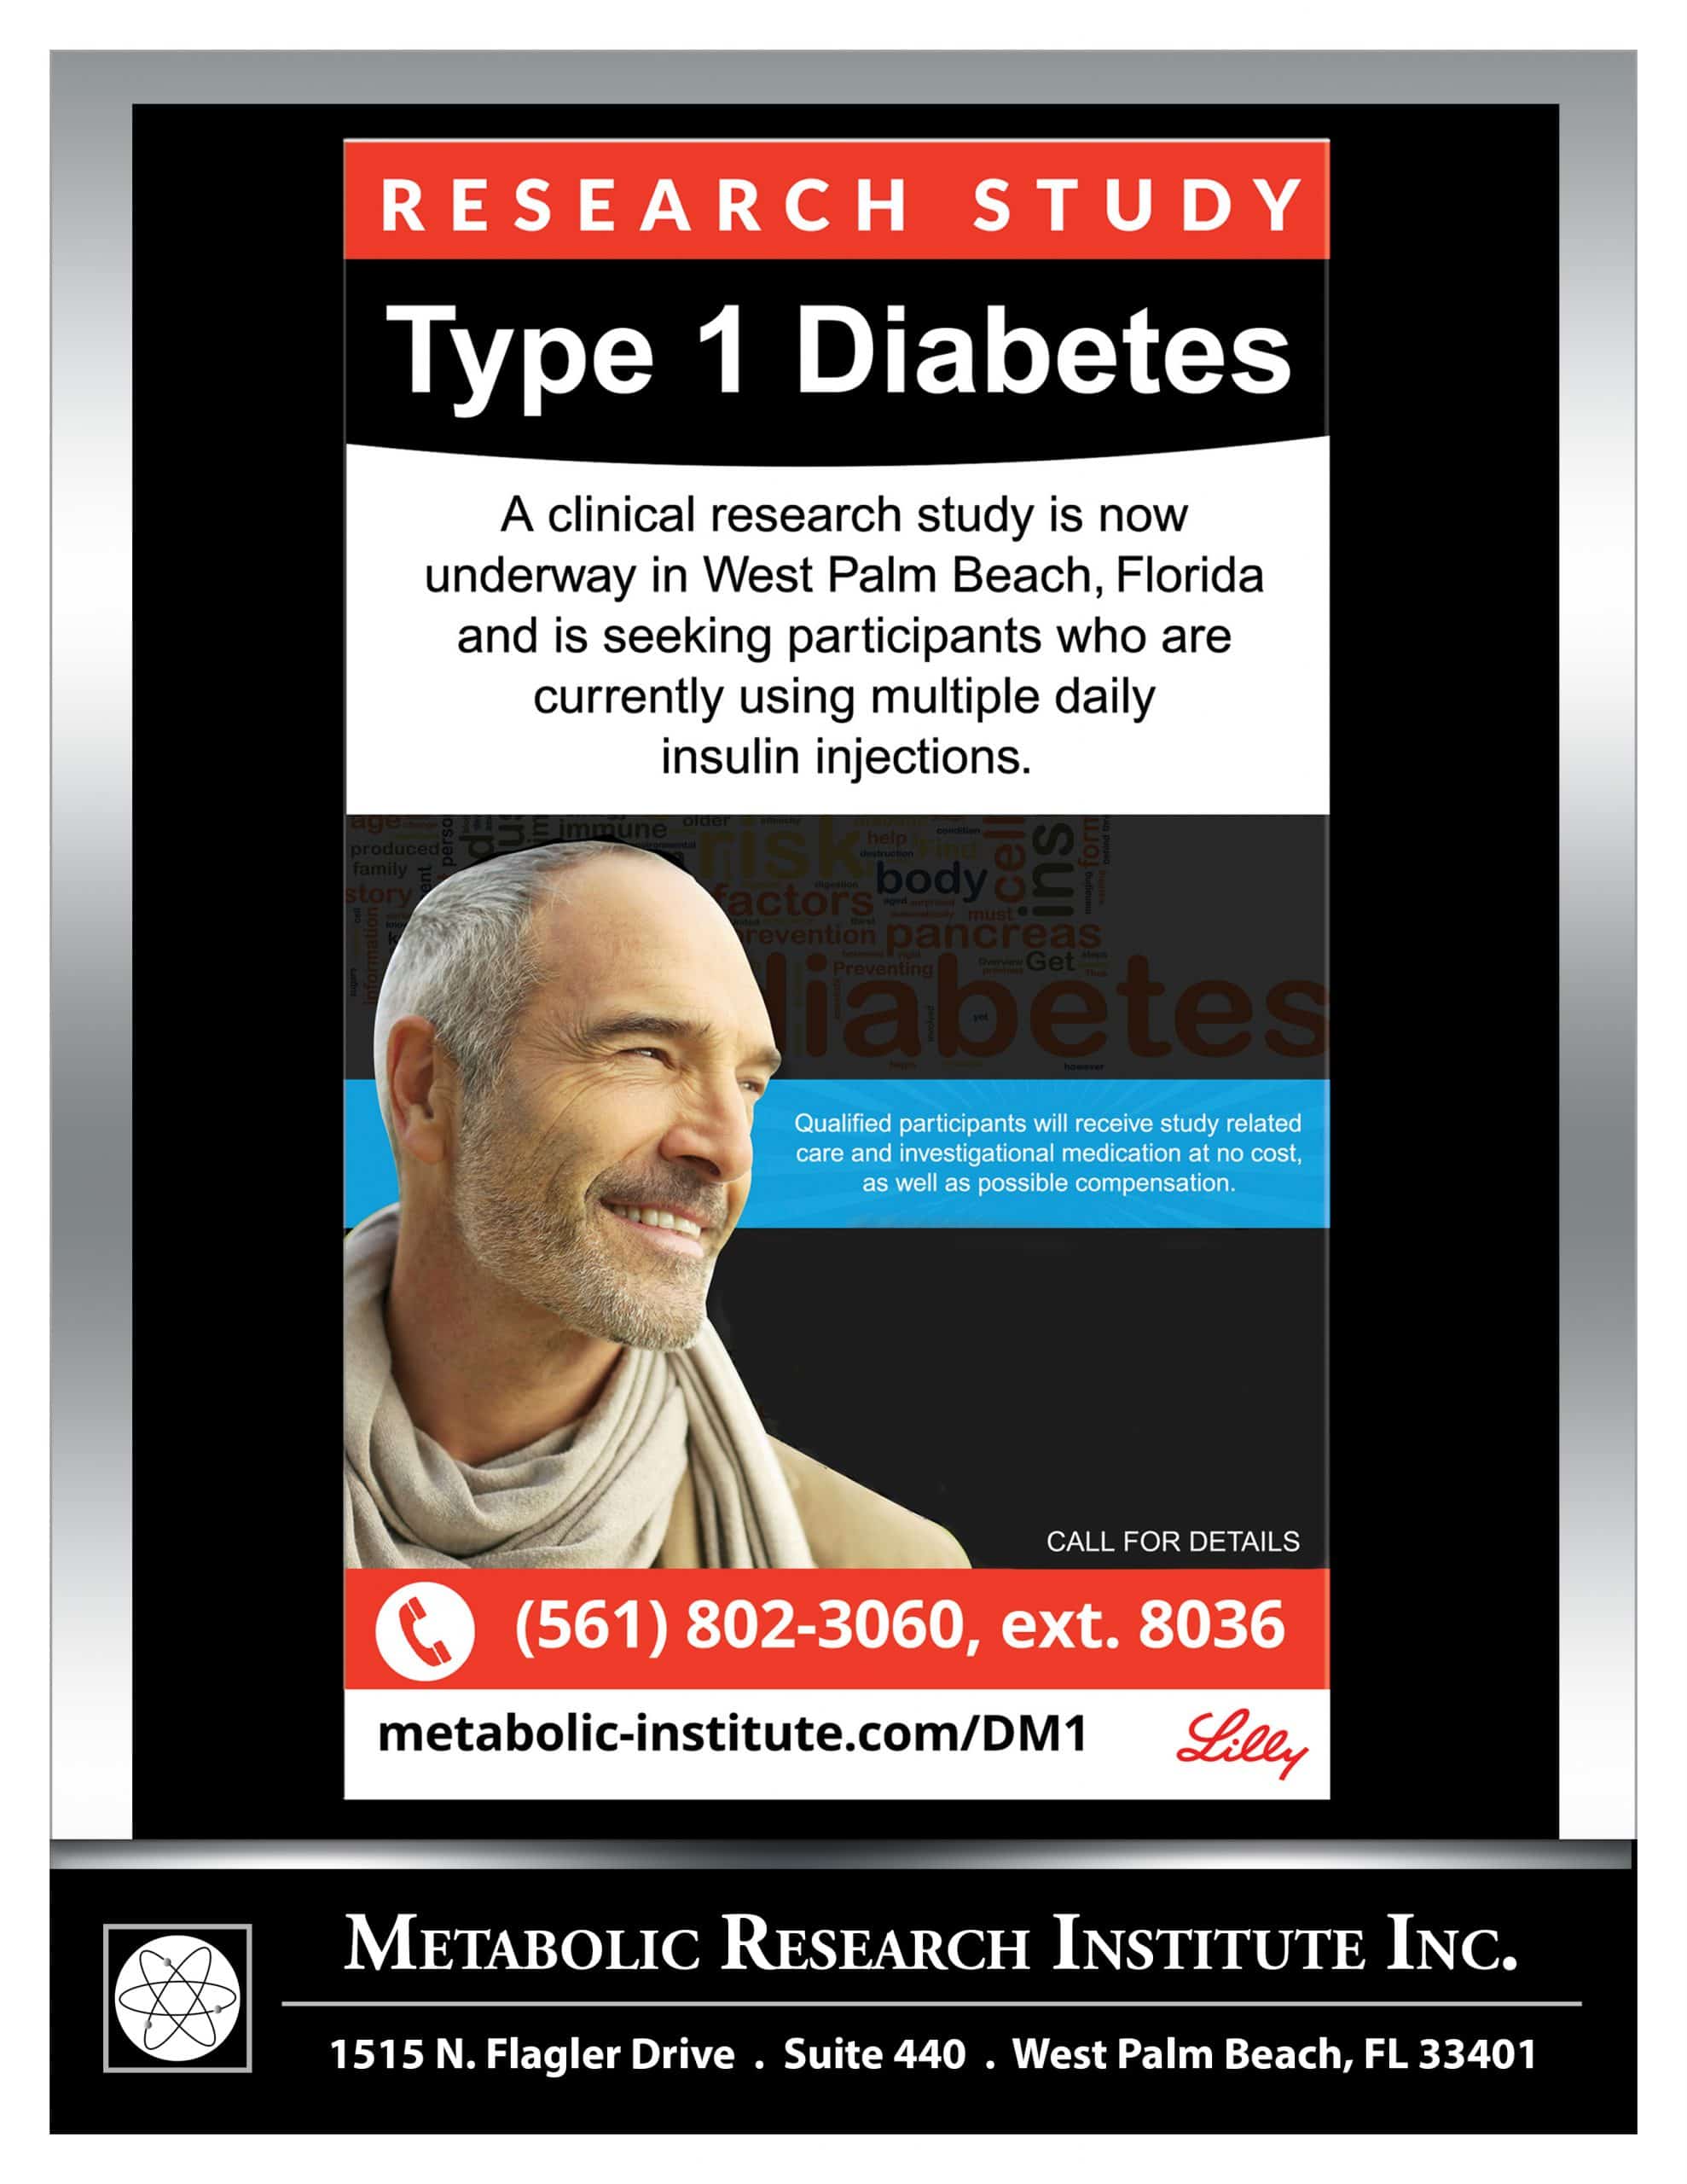 Type 1 Diabetes on insulin: clinical trial informationalal flyer